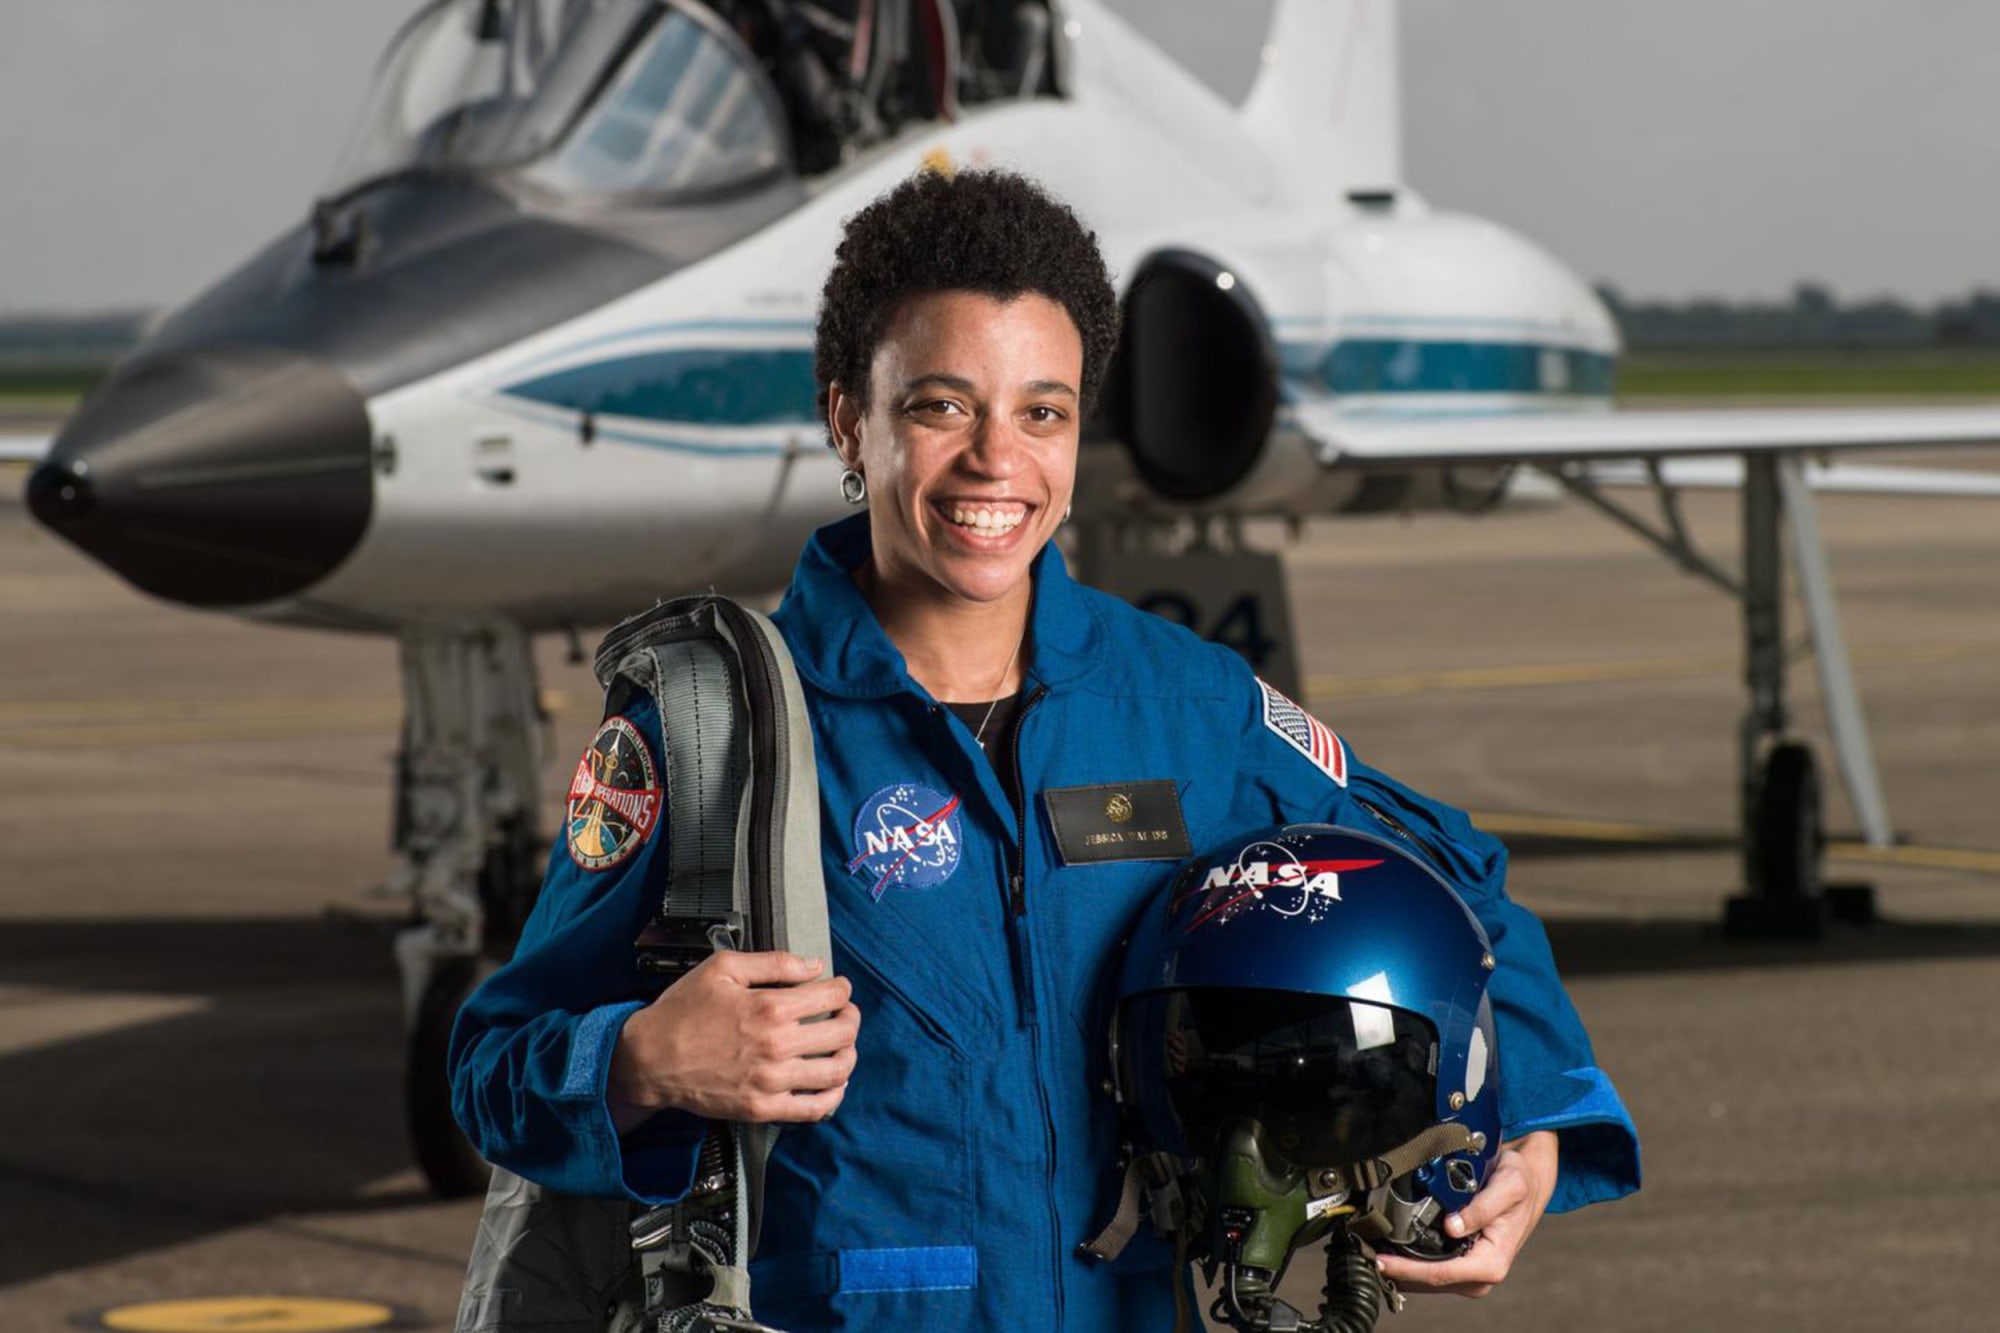 NASA Astronaut Jessica Watkins to Make History as First Black Woman to Join International Space Station Crew on Long-Duration Mission